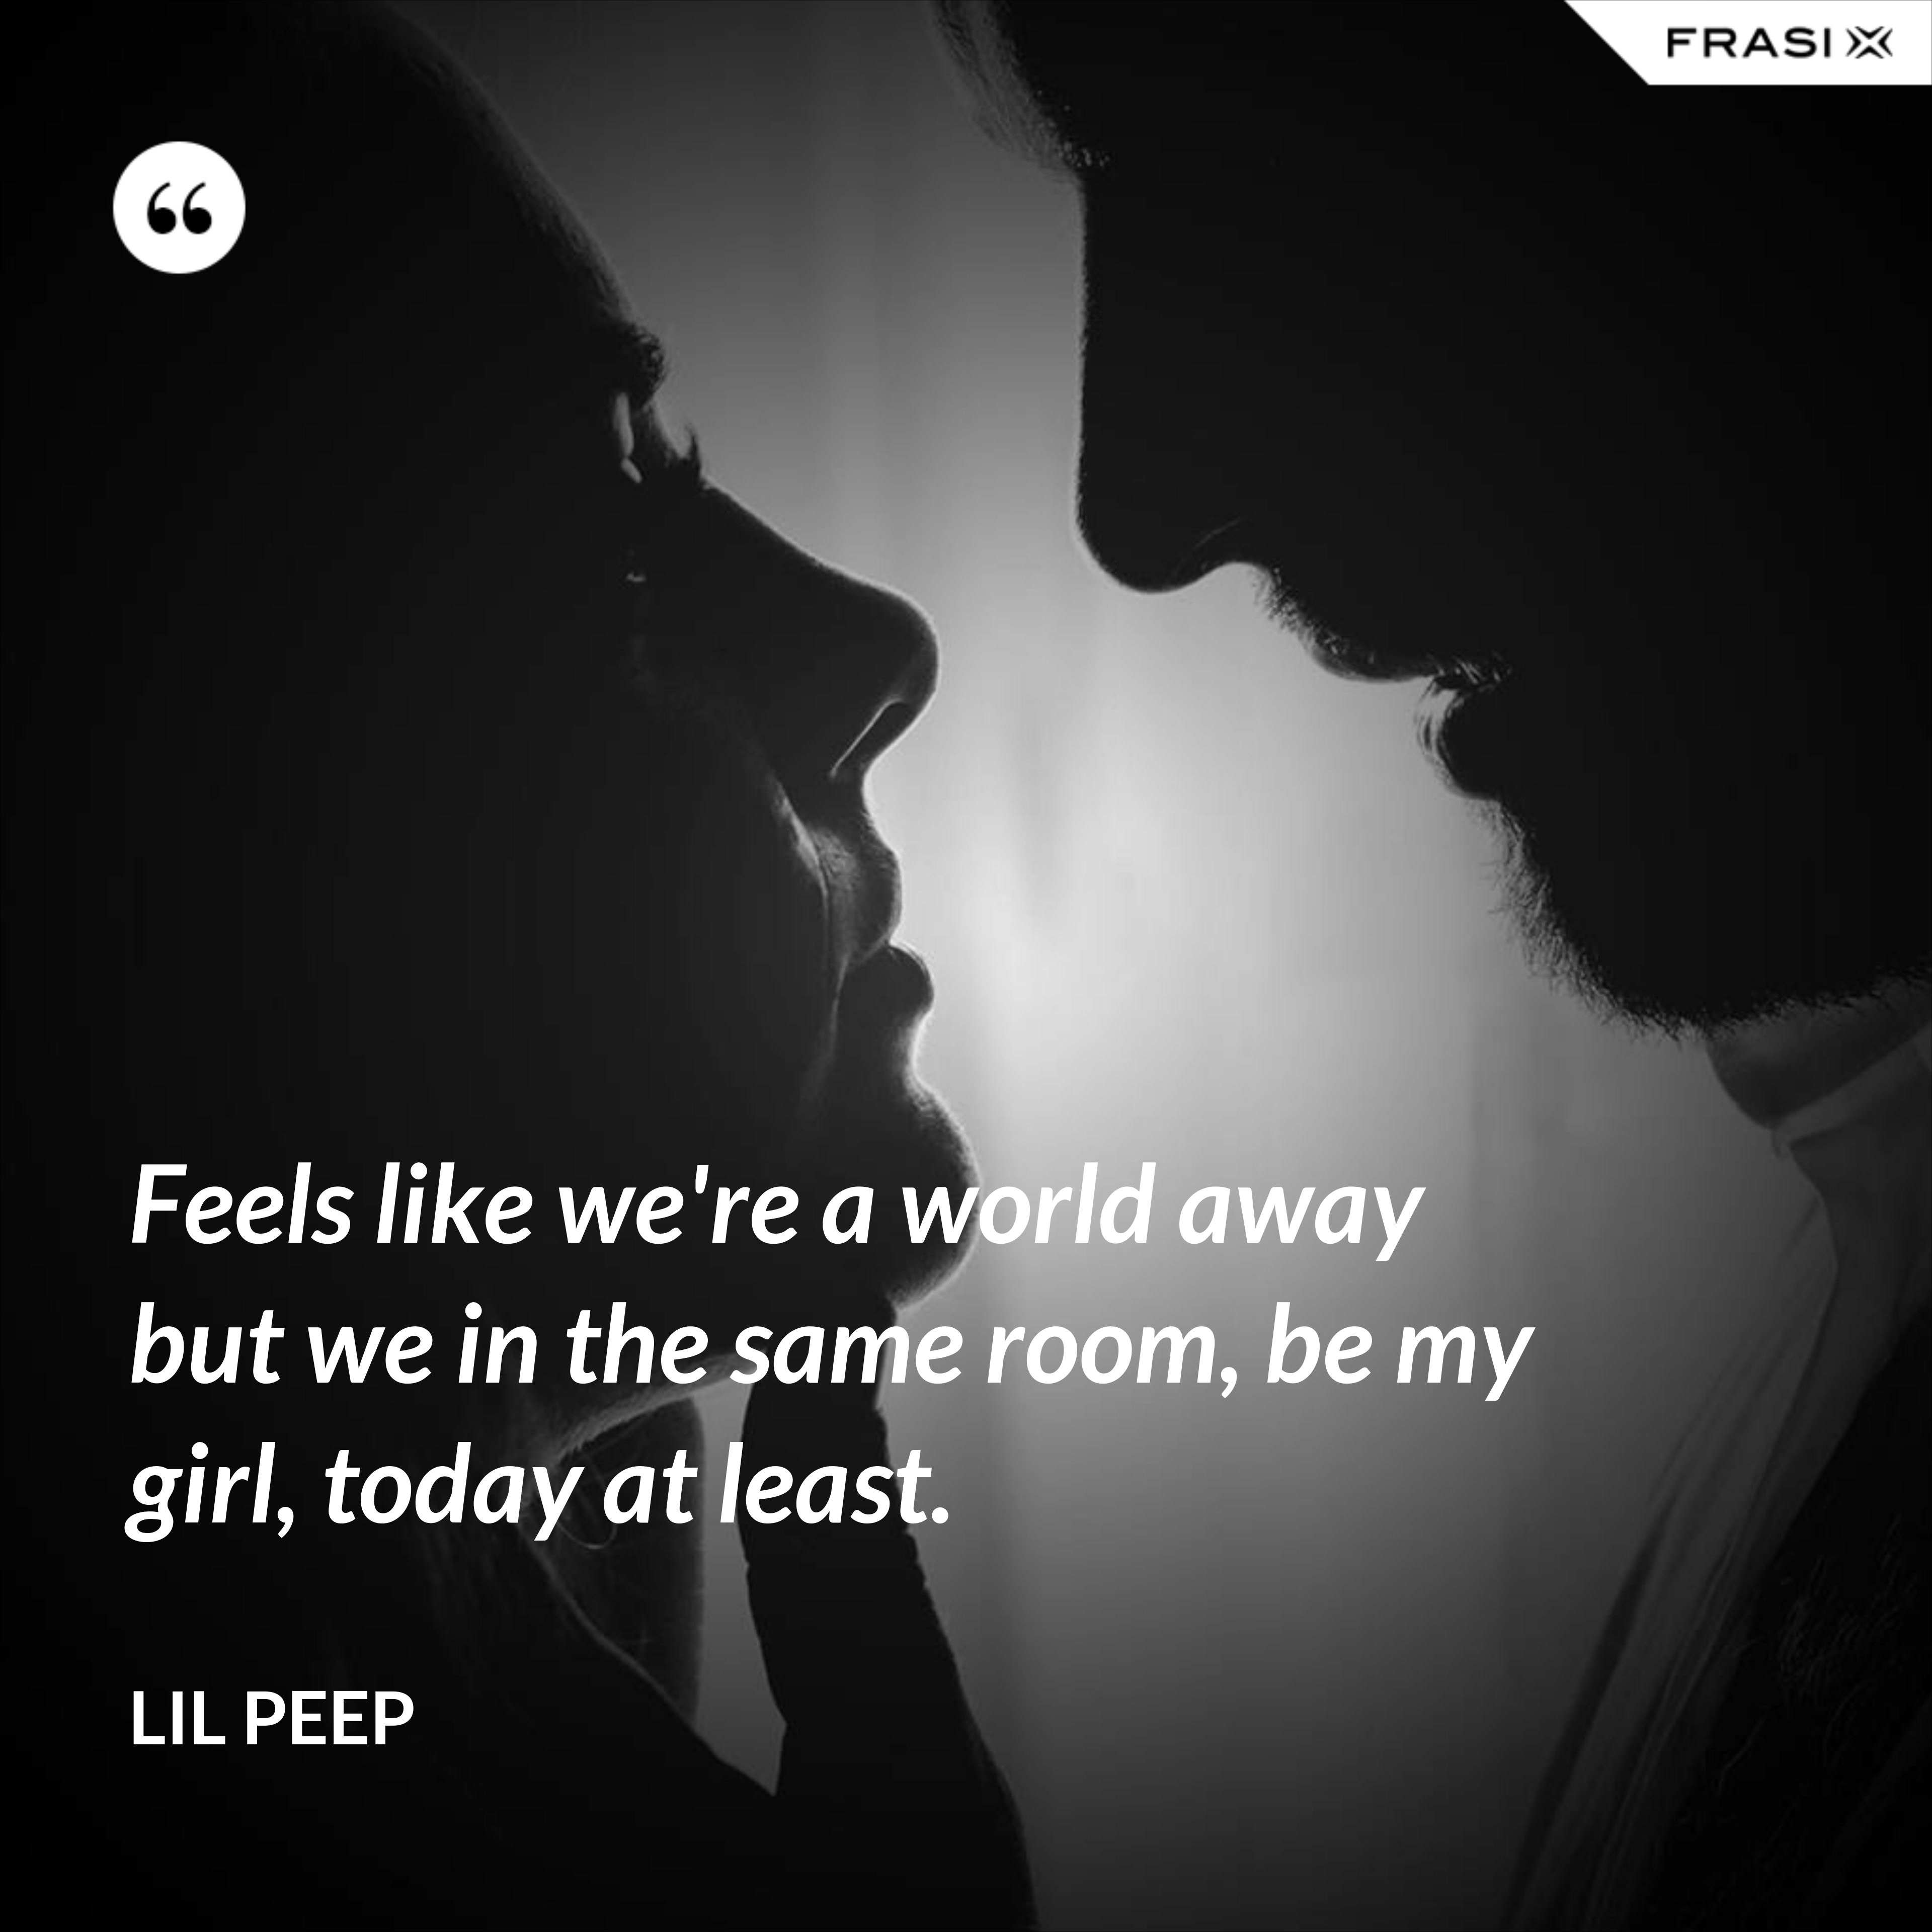 Feels like we're a world away but we in the same room, be my girl, today at least. - Lil Peep